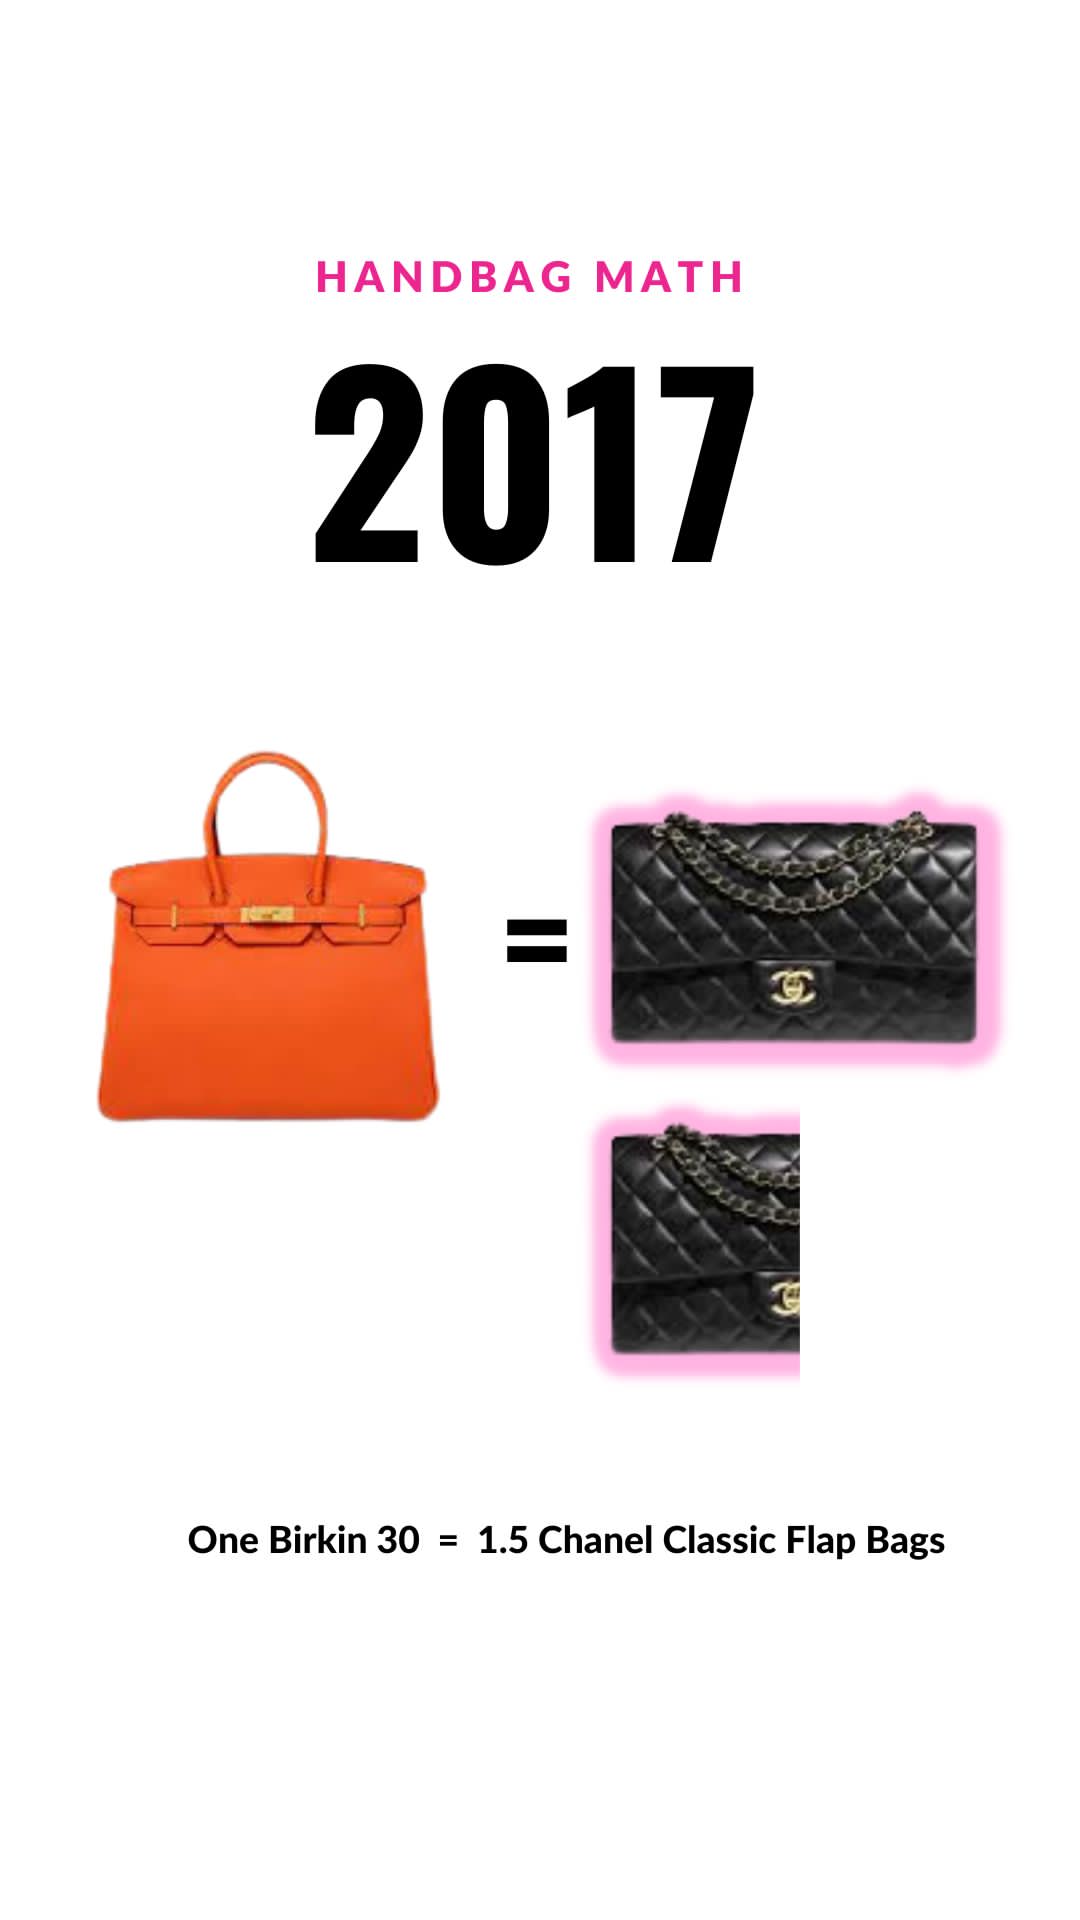 Hermes, Chanel, and Louis Vuitton: A Comparison of the Most